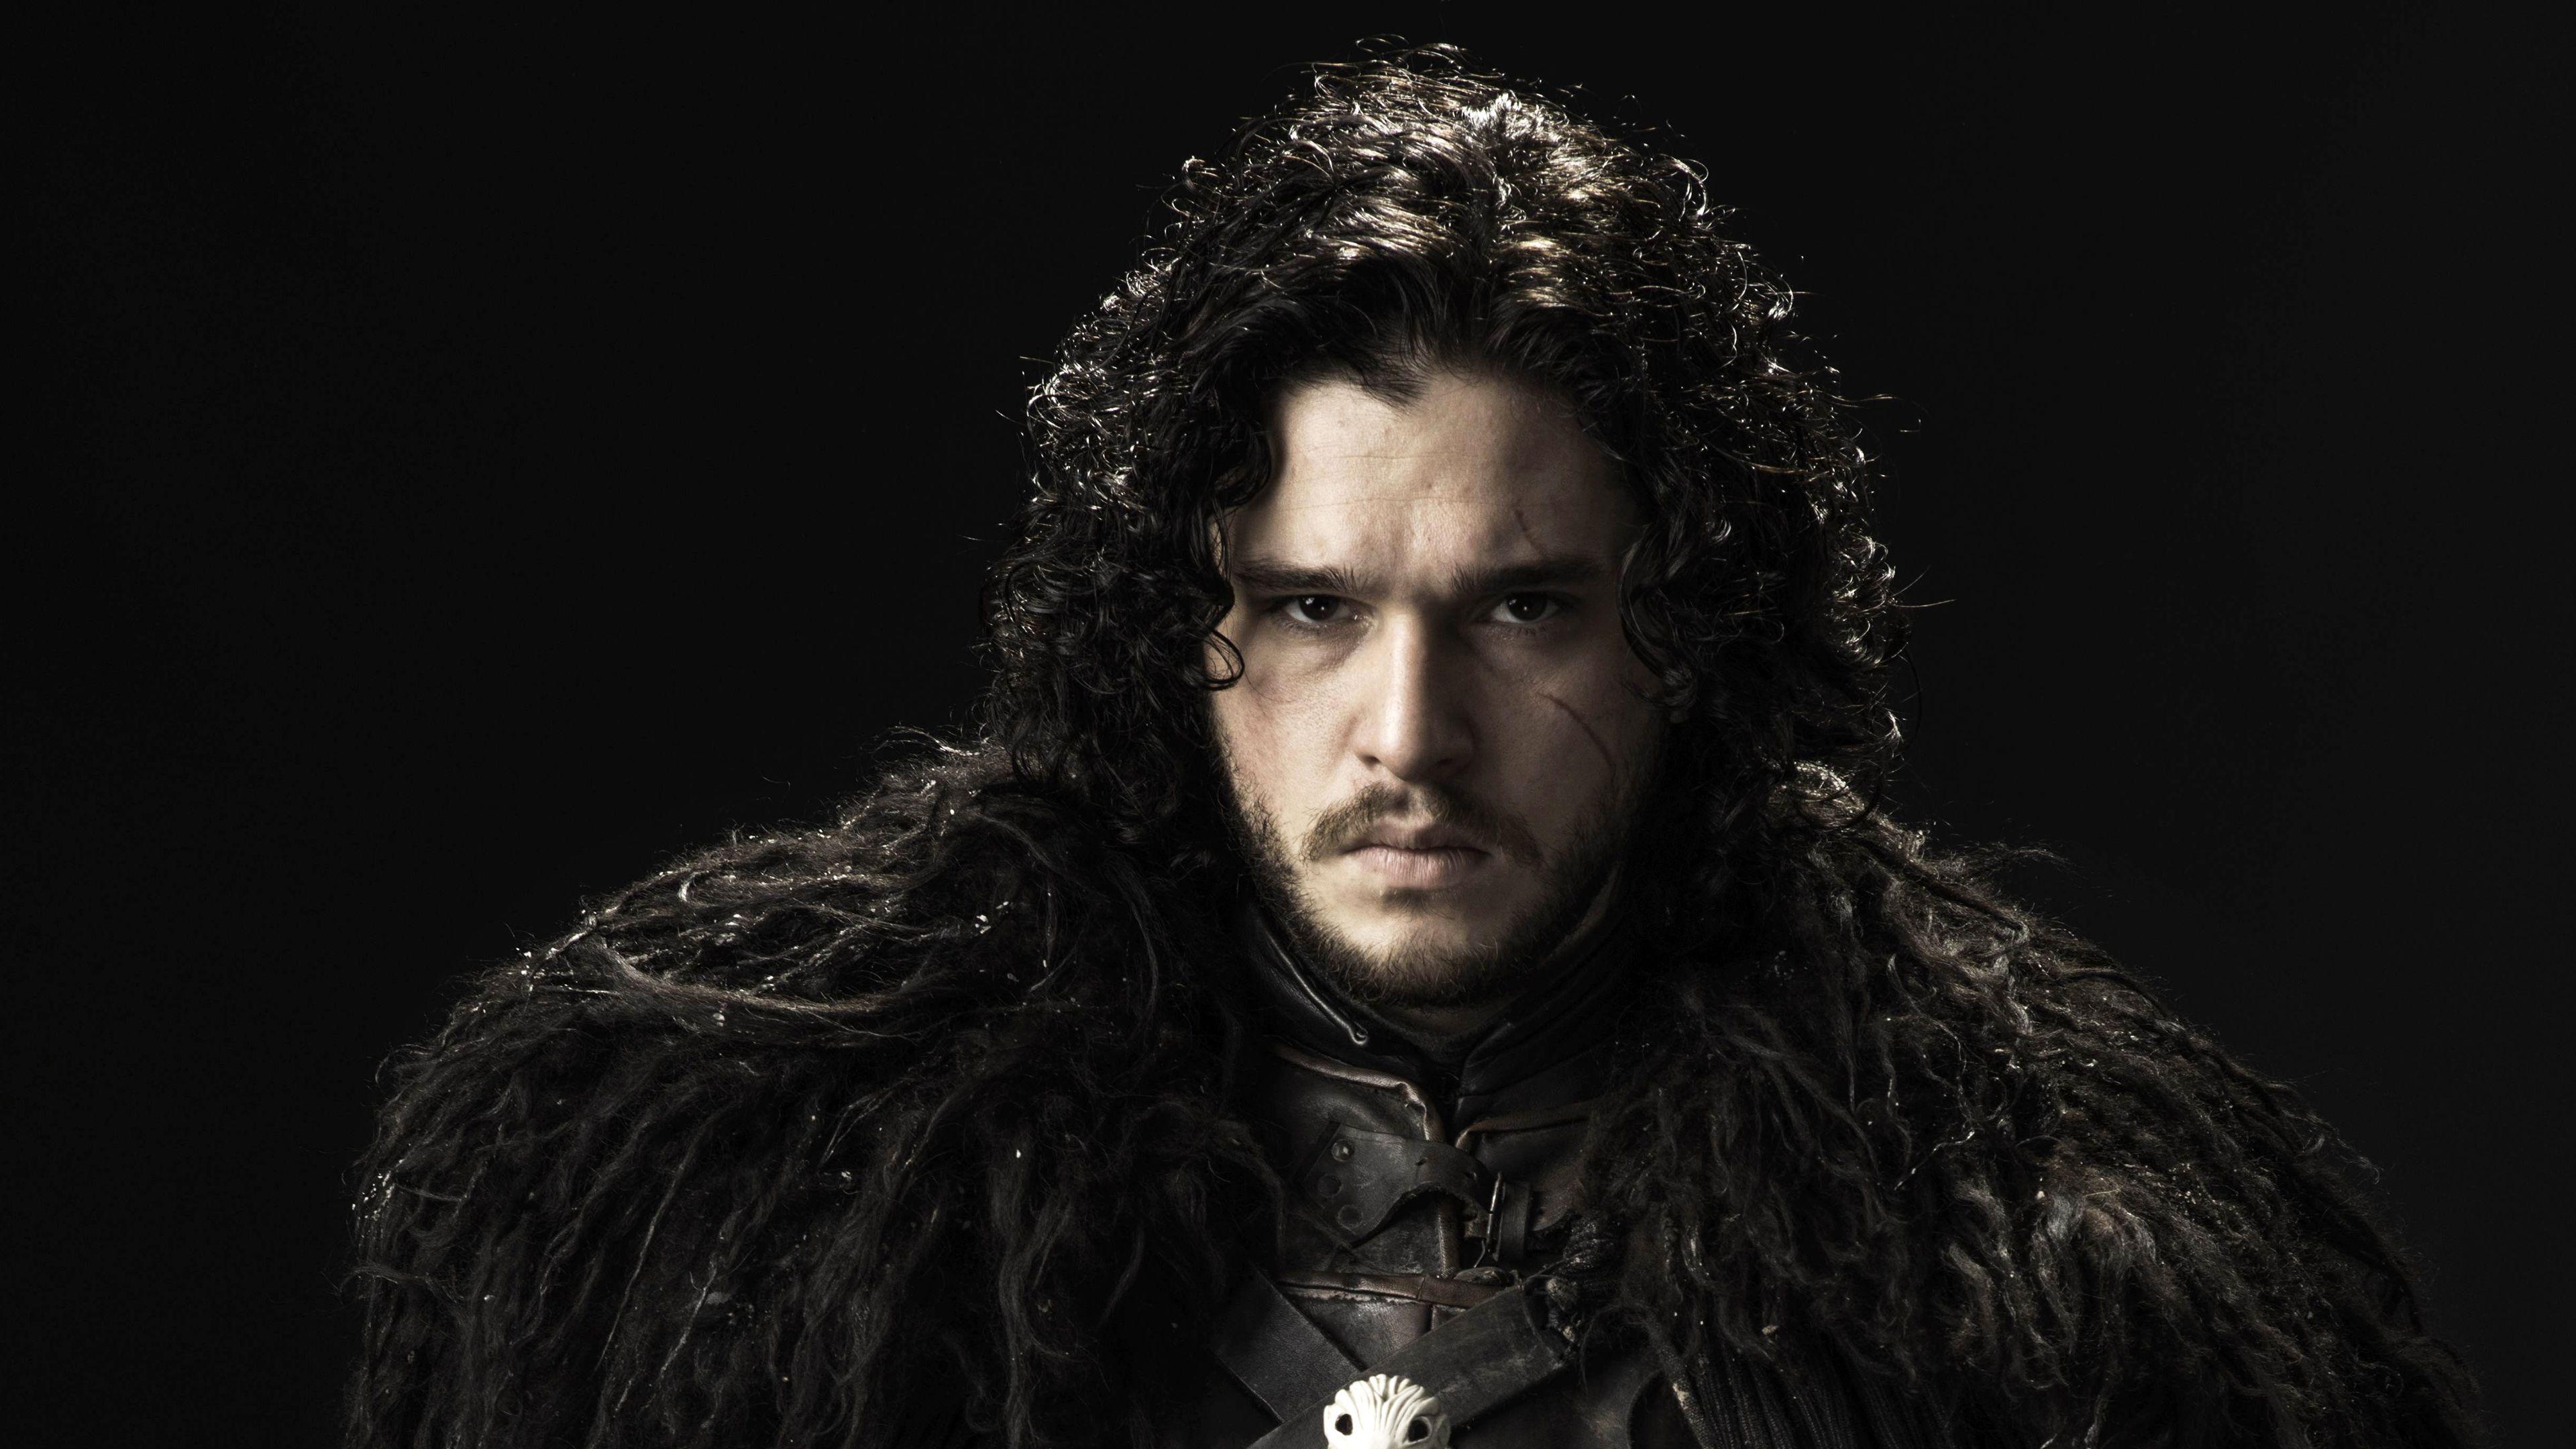 Jon Snow Full HD, HDTV, 1080p 16:9 Wallpapers, HD Jon Snow 1920x1080  Backgrounds, Free Images Download